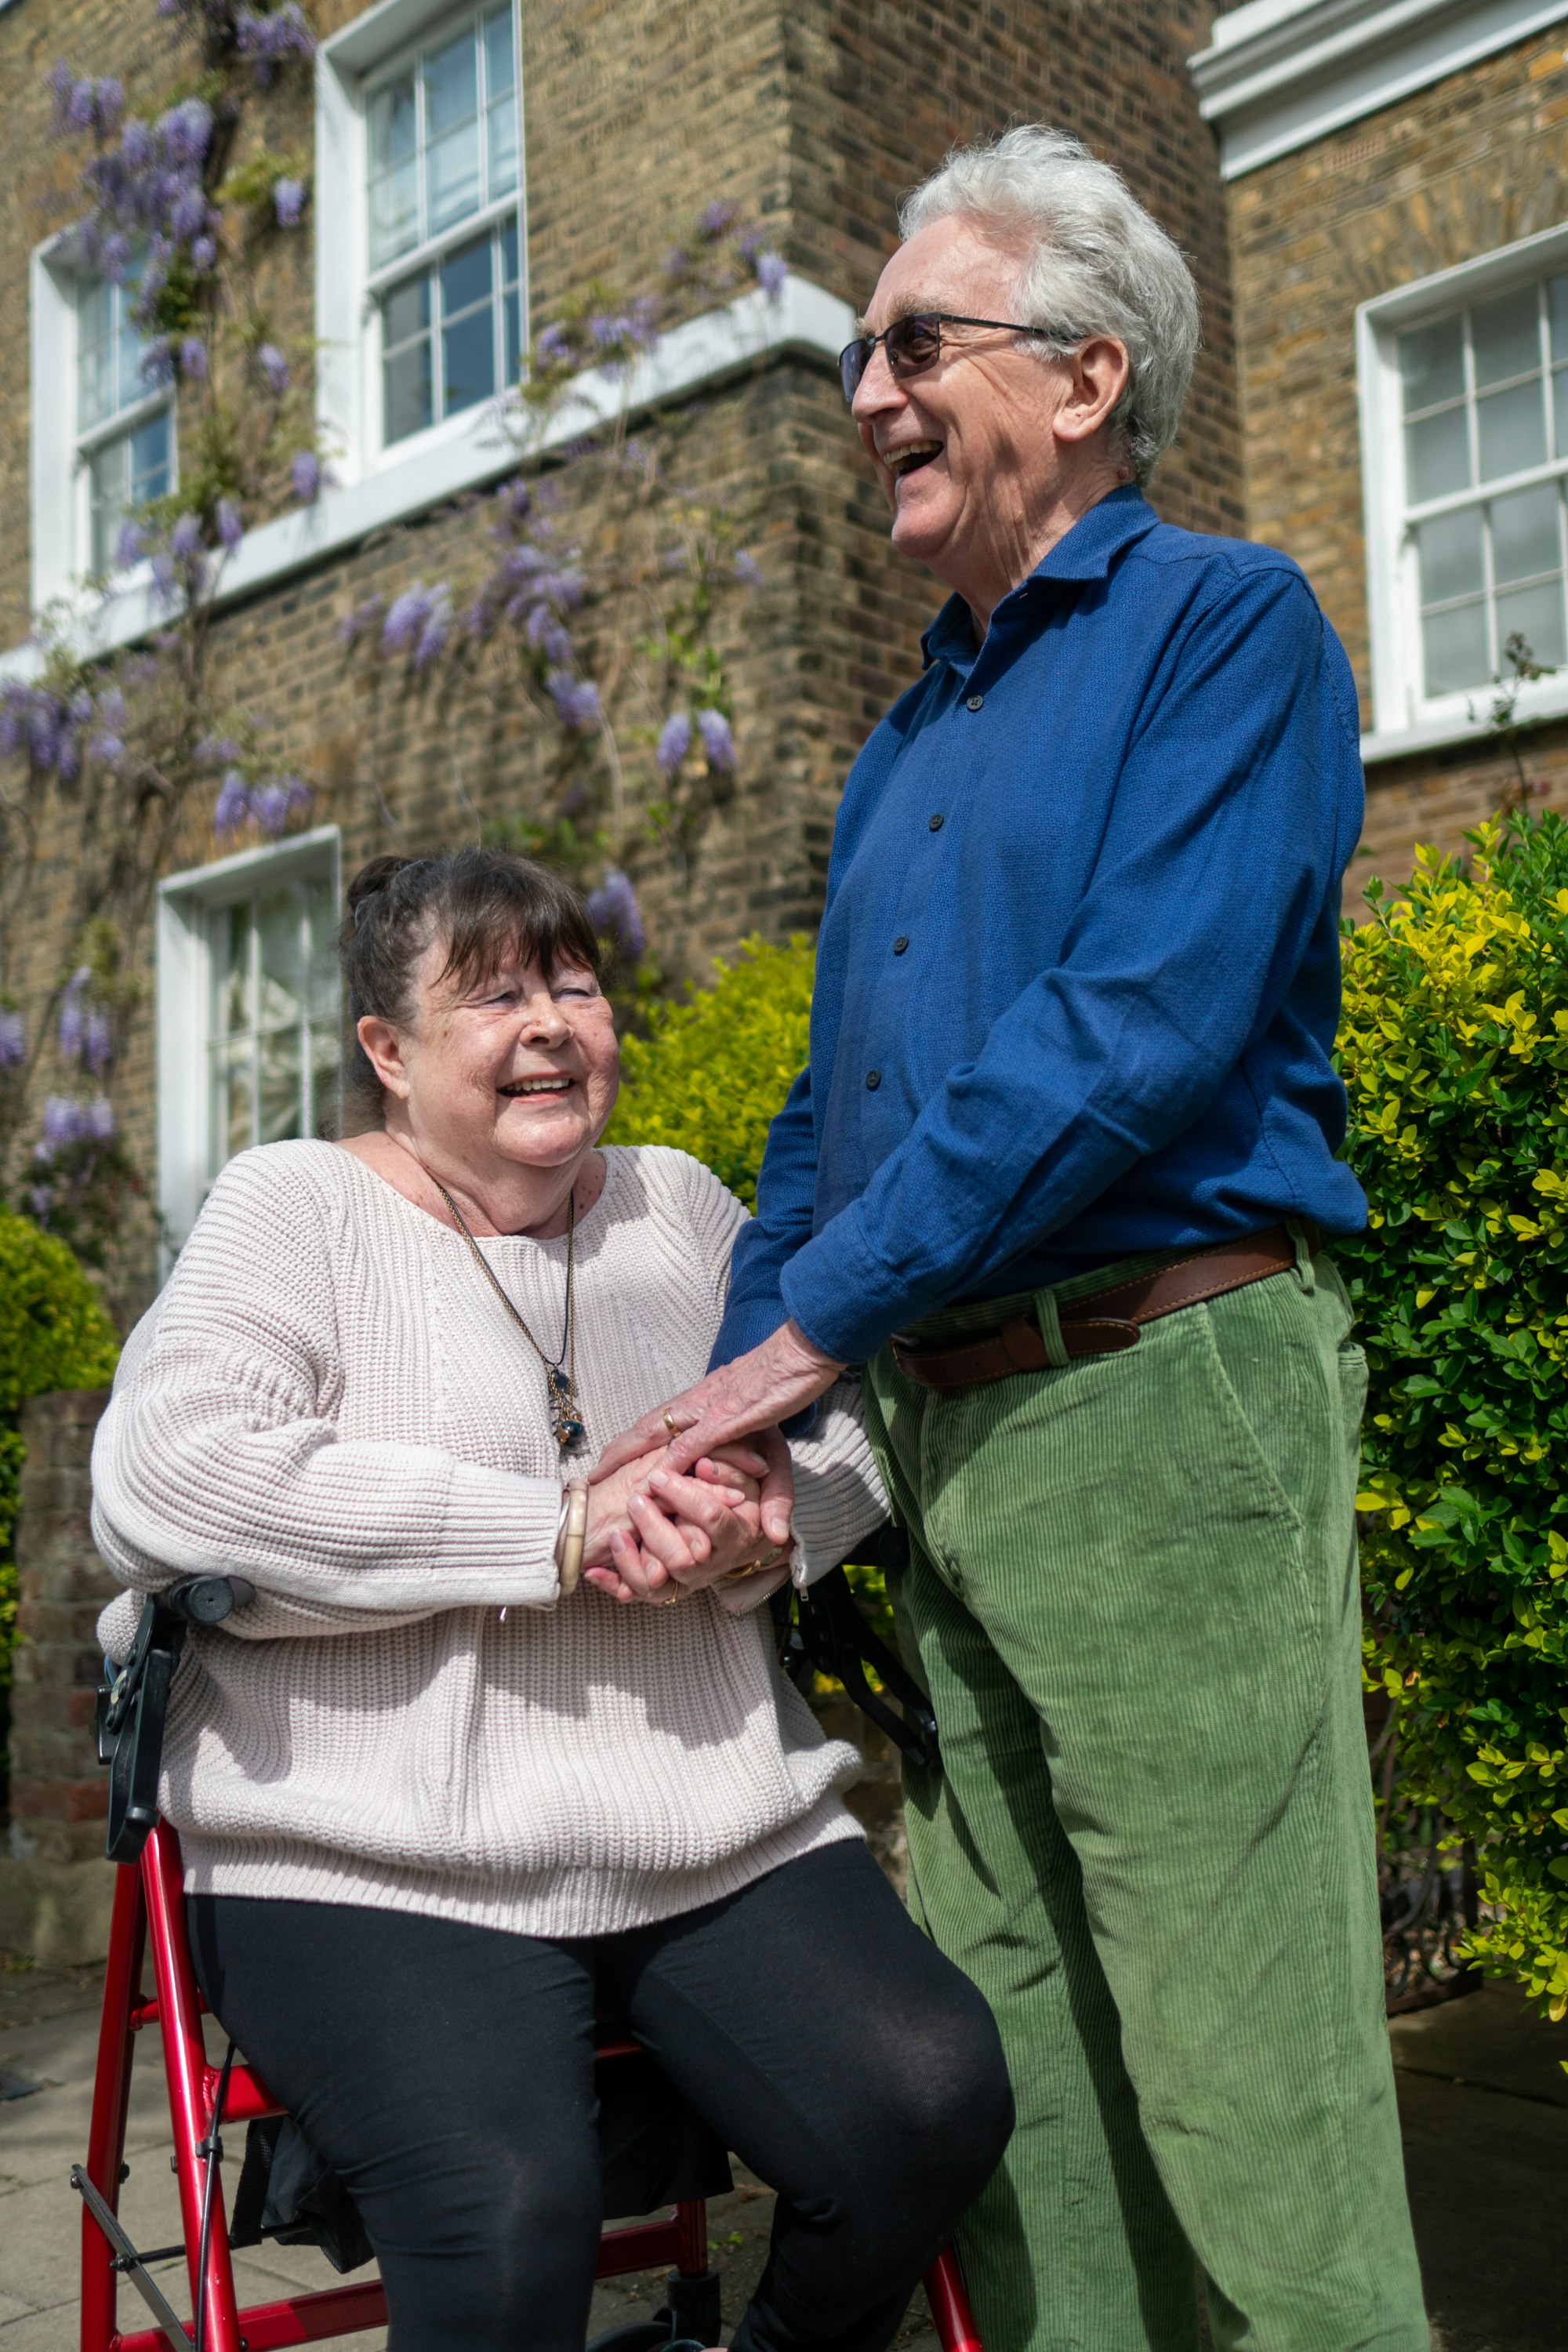 Making Memories, Not Enemies, With Your Loved One With Dementia